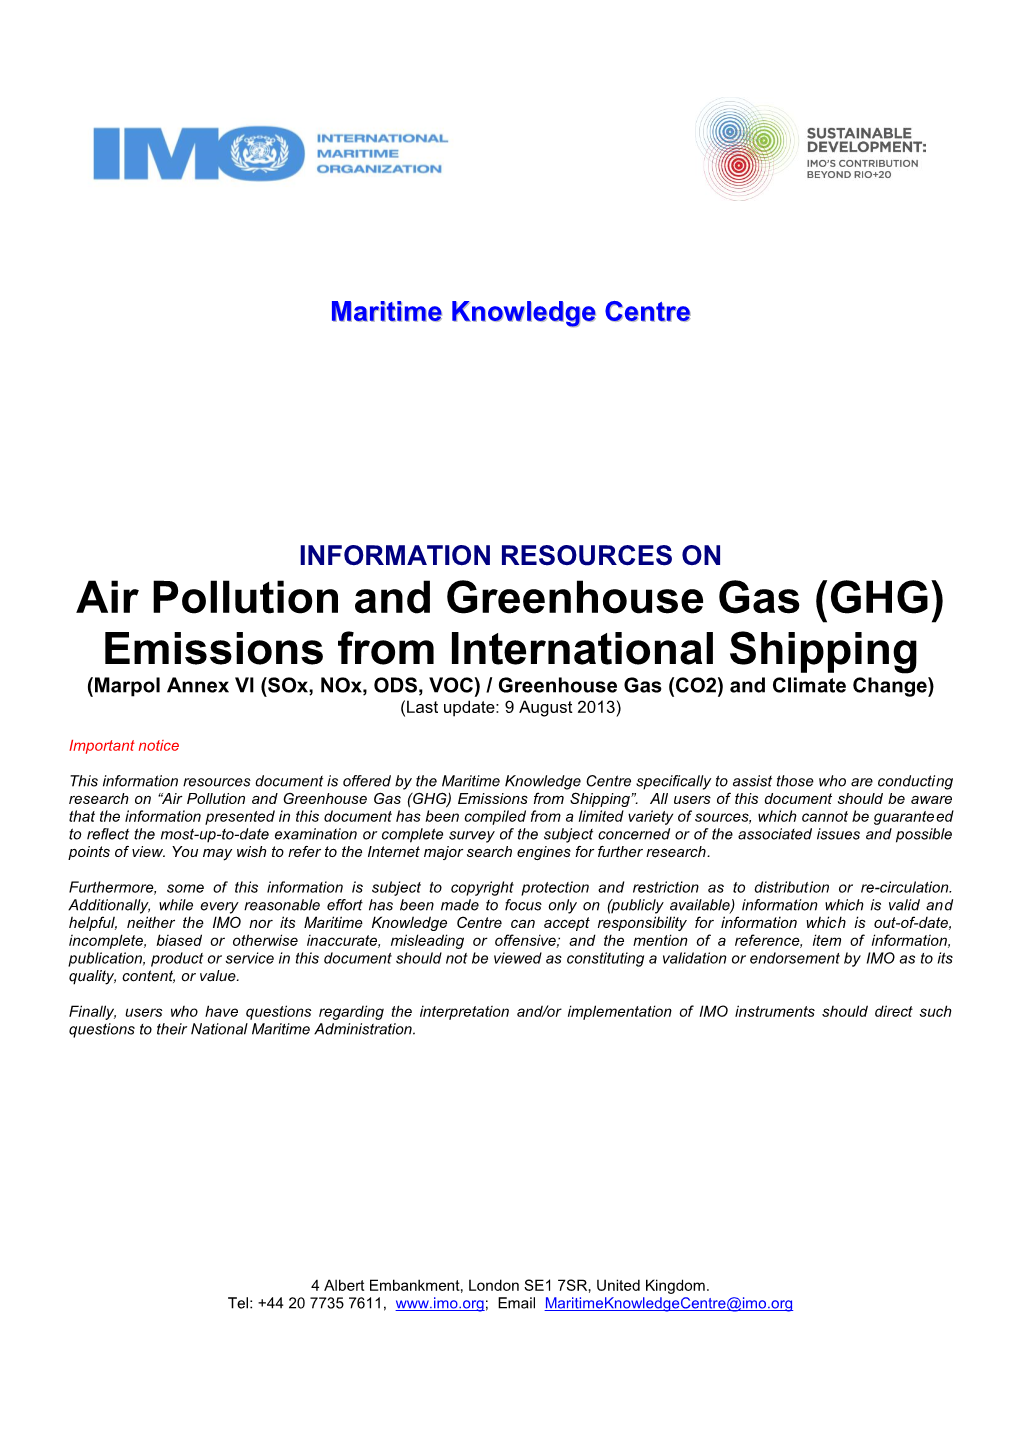 Air Pollution and Greenhouse Gas (GHG) Emissions from International